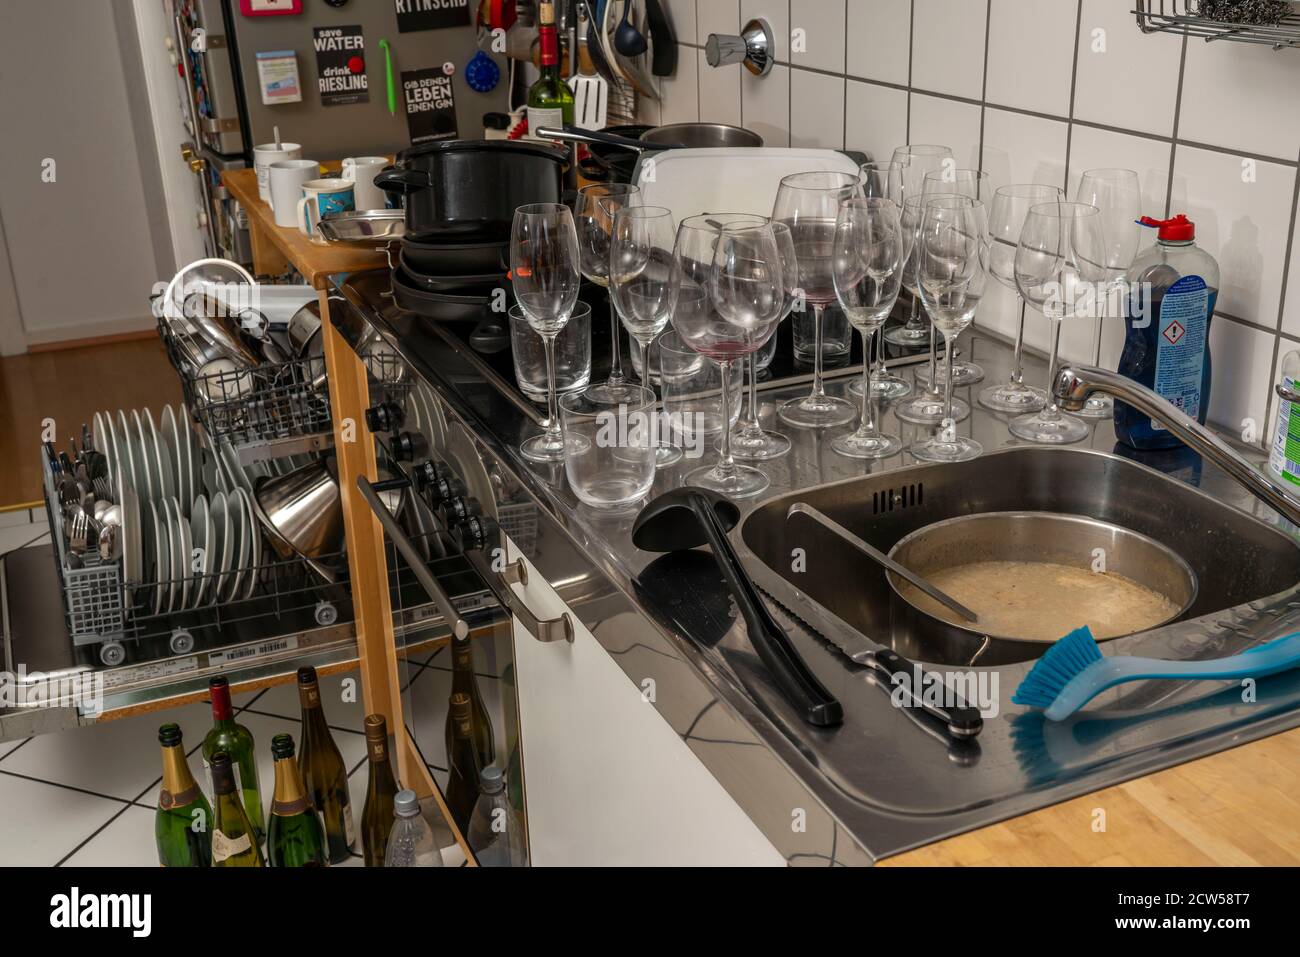 kitchen after a larger dinner, cooking party, dishwasher, full, with cleaned dishes, dirty glasses, pots, cooking equipment on the sink, was Stock Photo